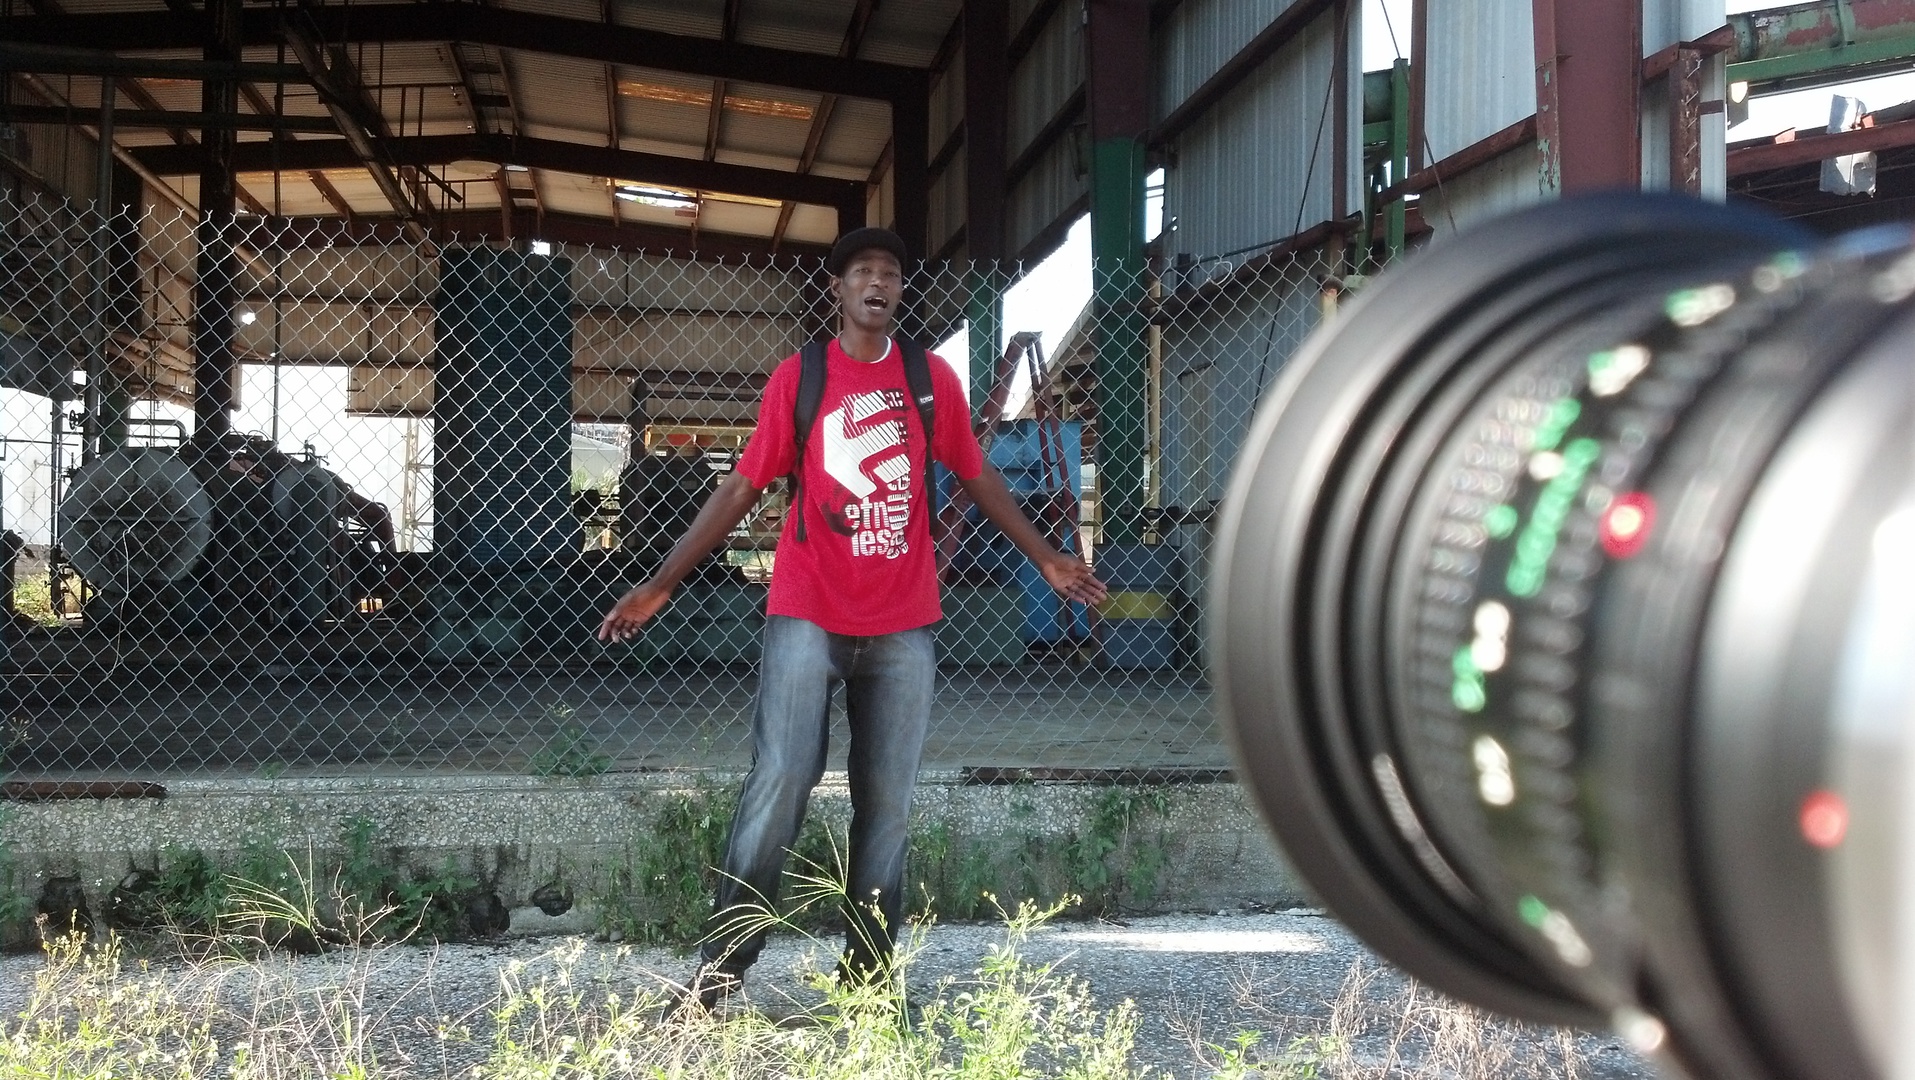 A picture of hands on rapping while filming a video